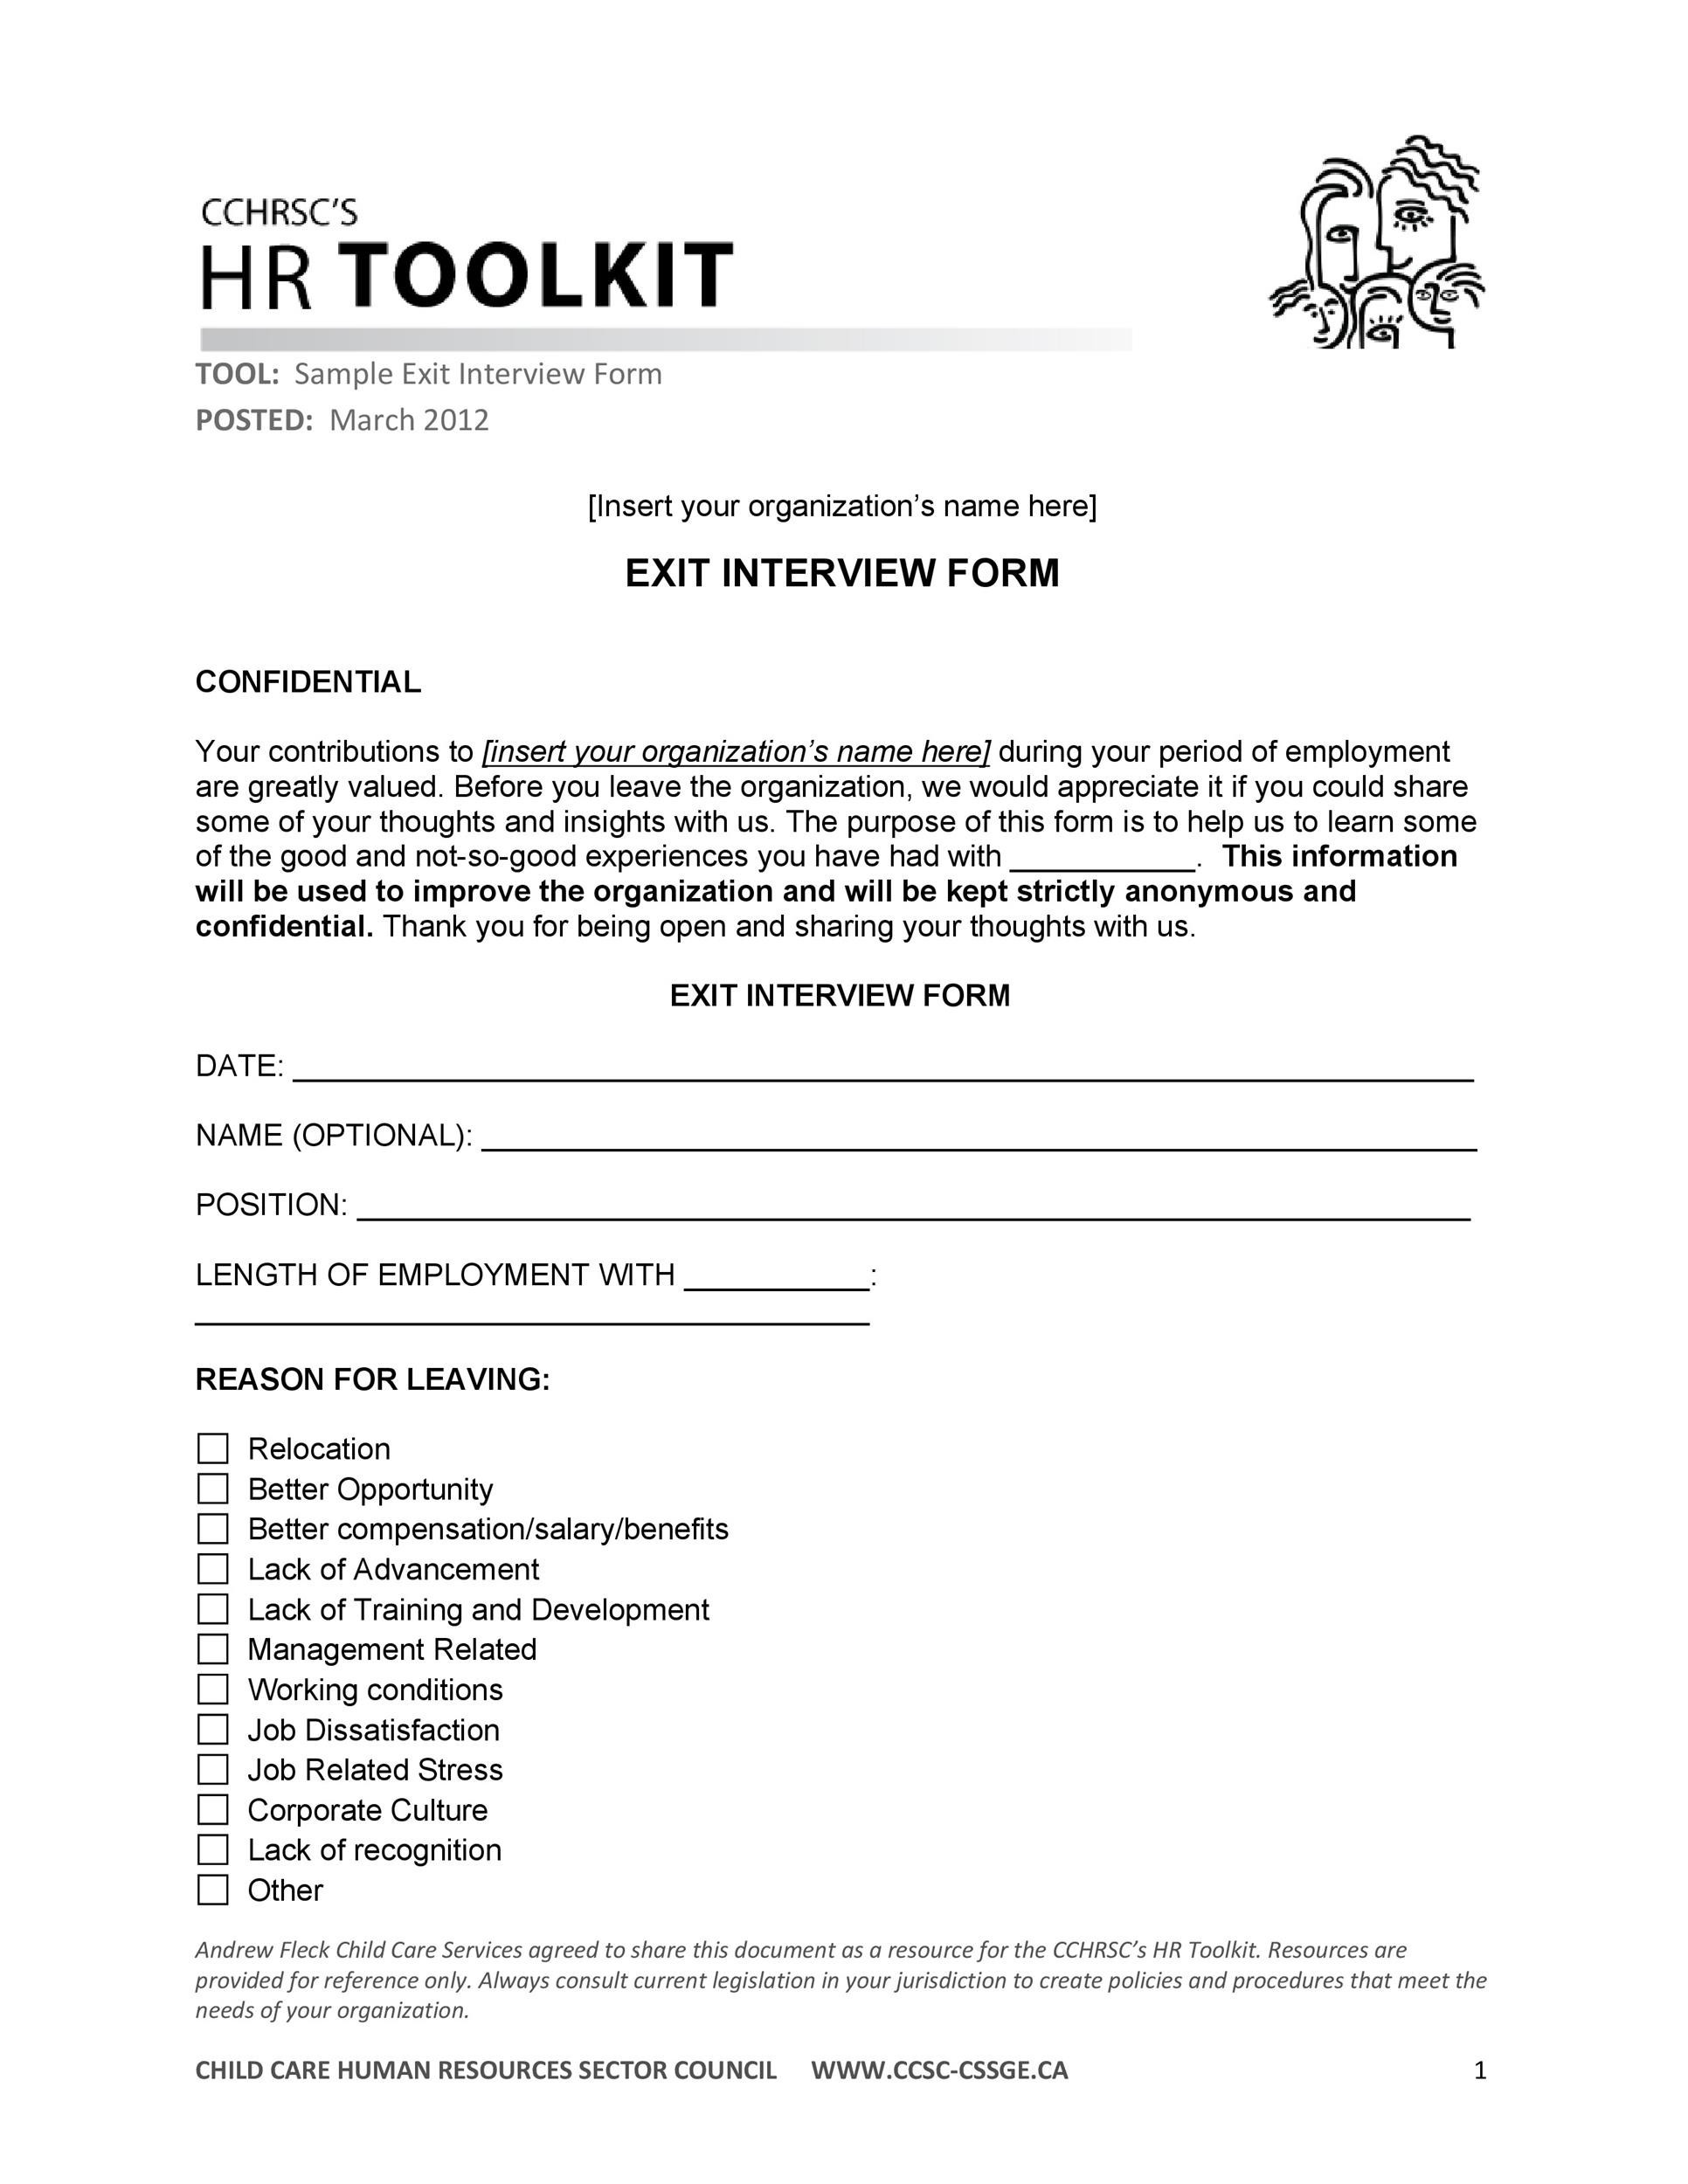 40 Best Exit Interview Templates & Forms ᐅ TemplateLab